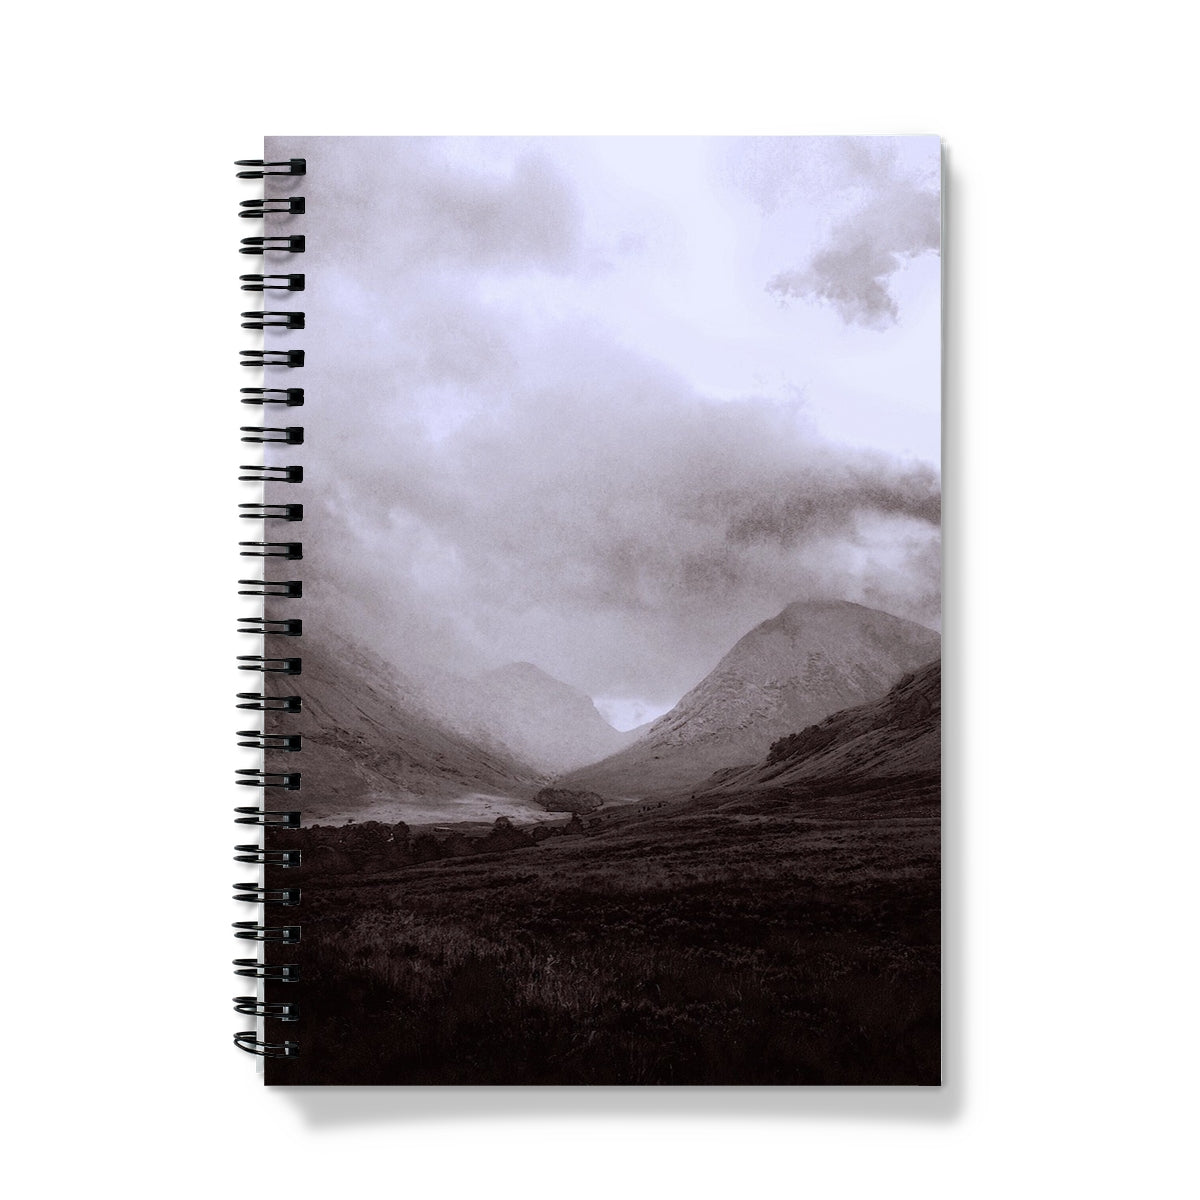 Glencoe Mist Art Gifts Notebook-Journals & Notebooks-Glencoe Art Gallery-A4-Lined-Paintings, Prints, Homeware, Art Gifts From Scotland By Scottish Artist Kevin Hunter